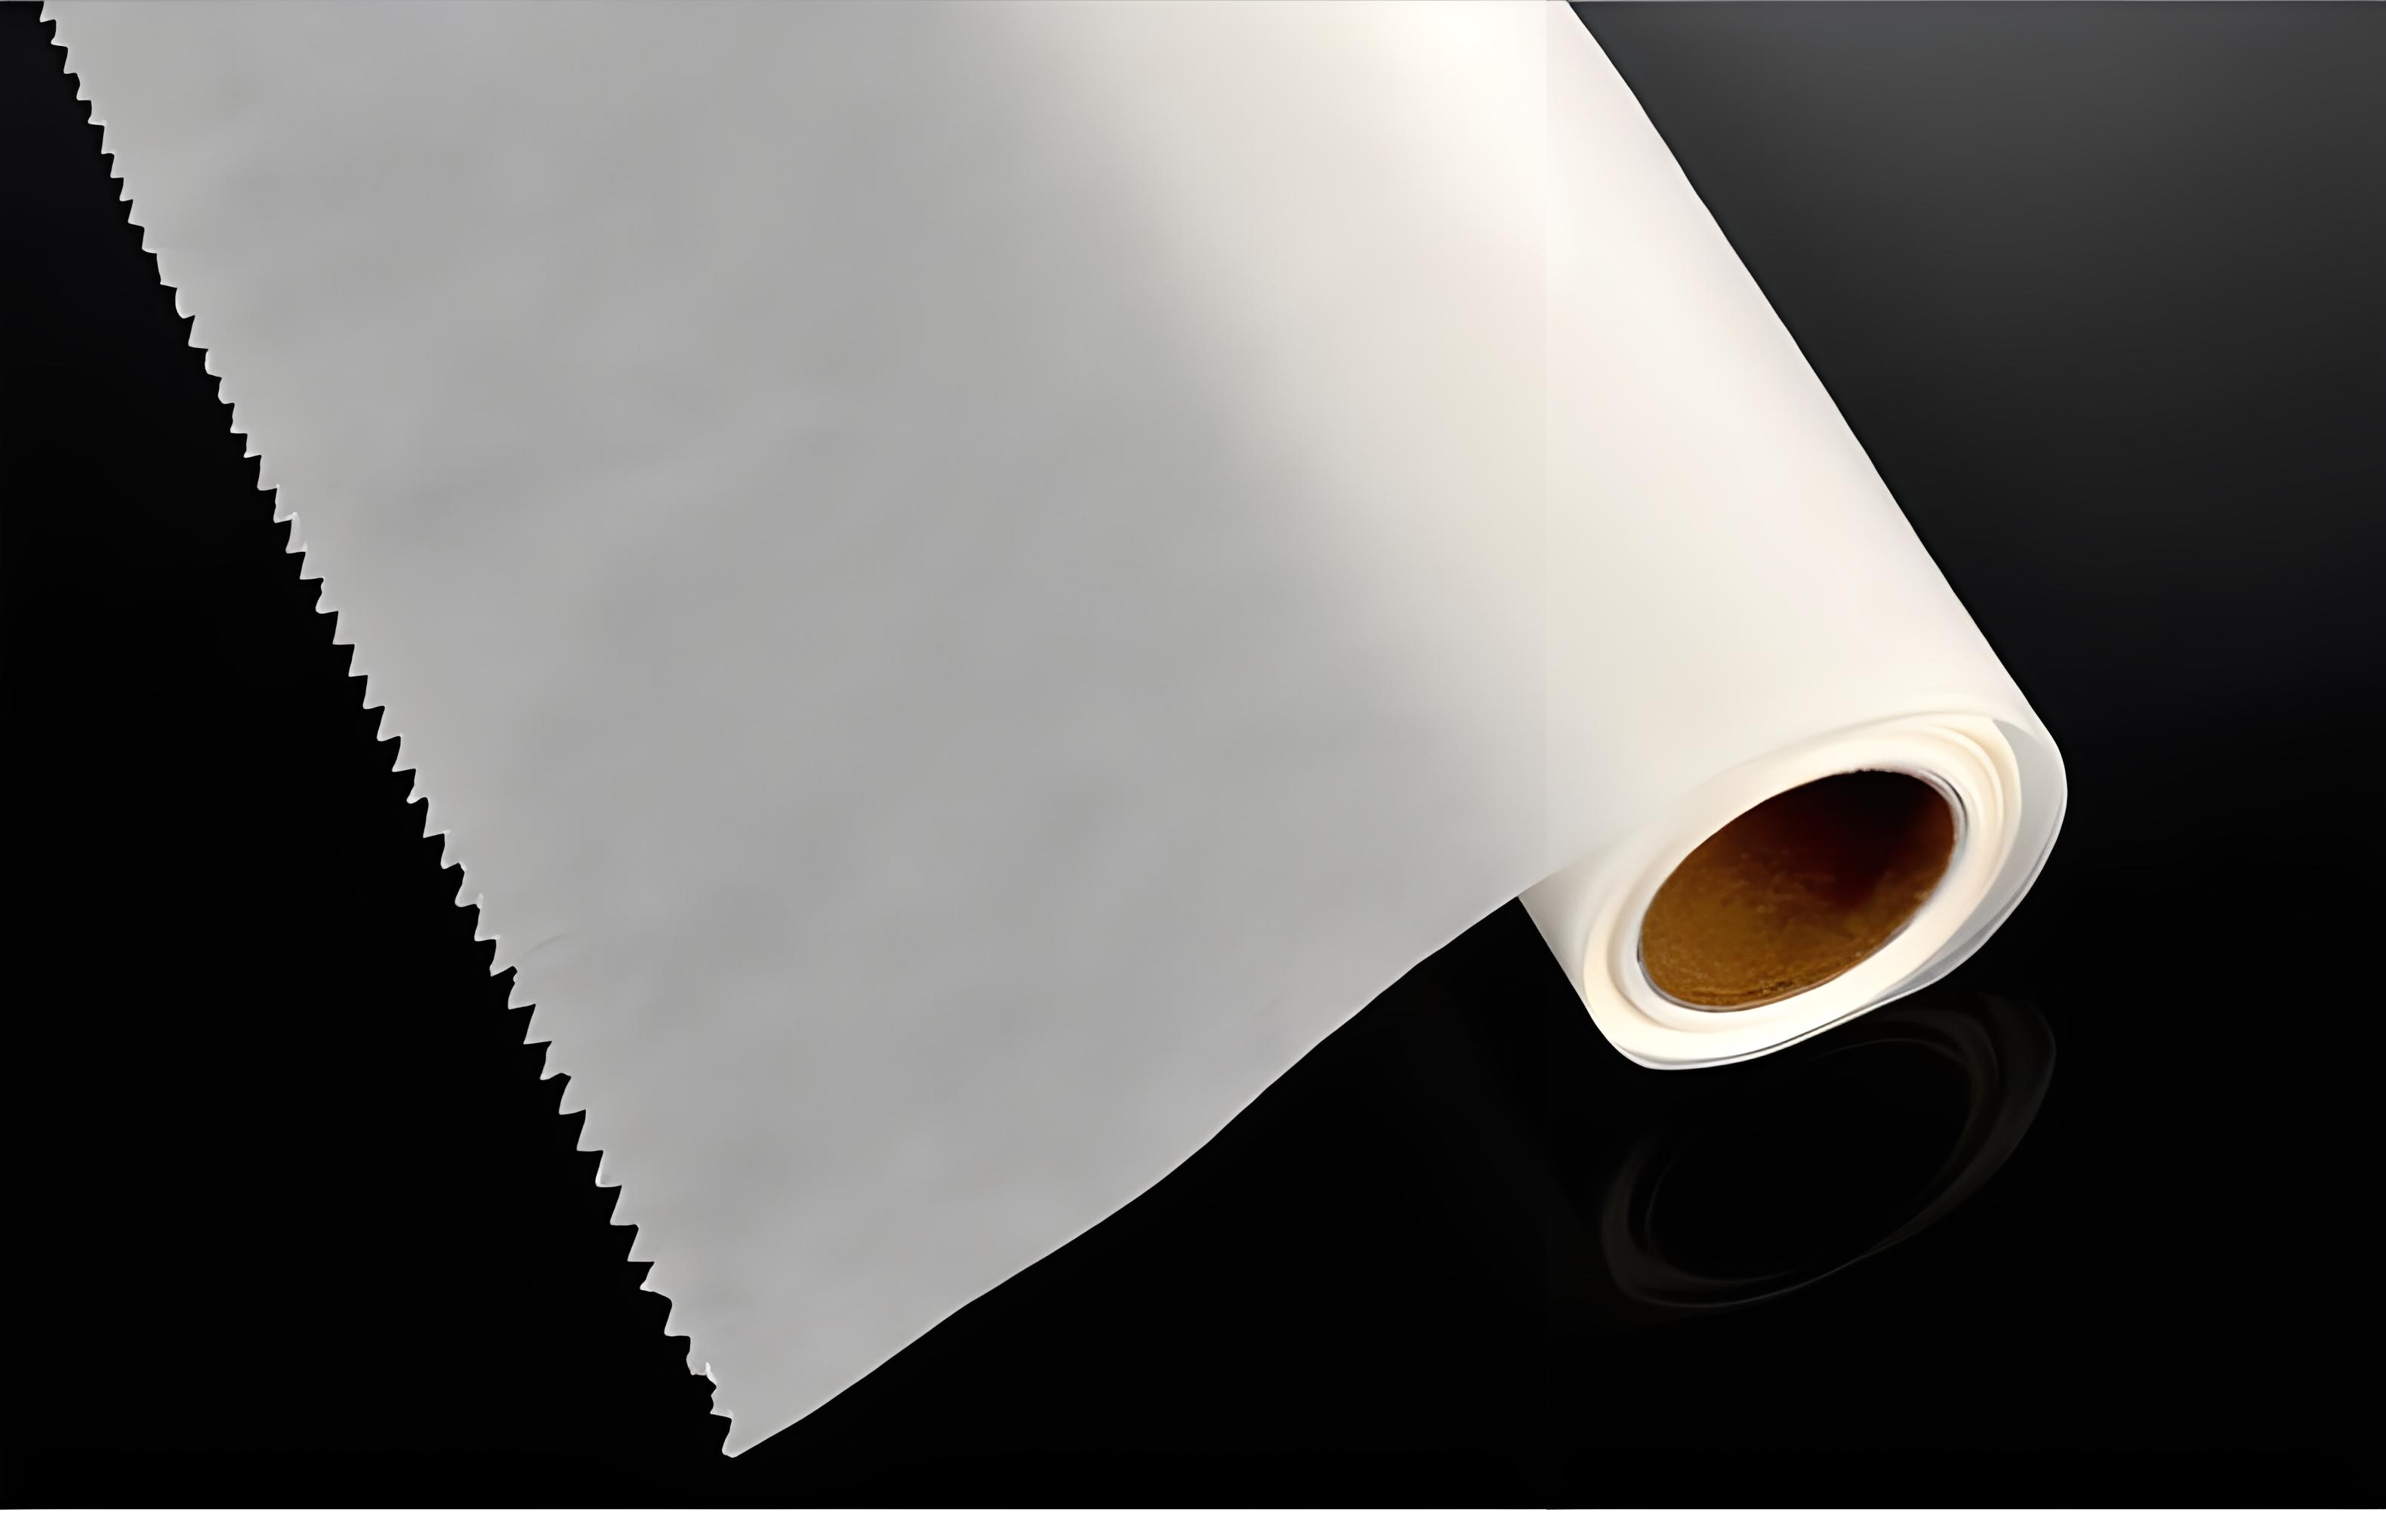 What is the inspection standard of Glasin paper？